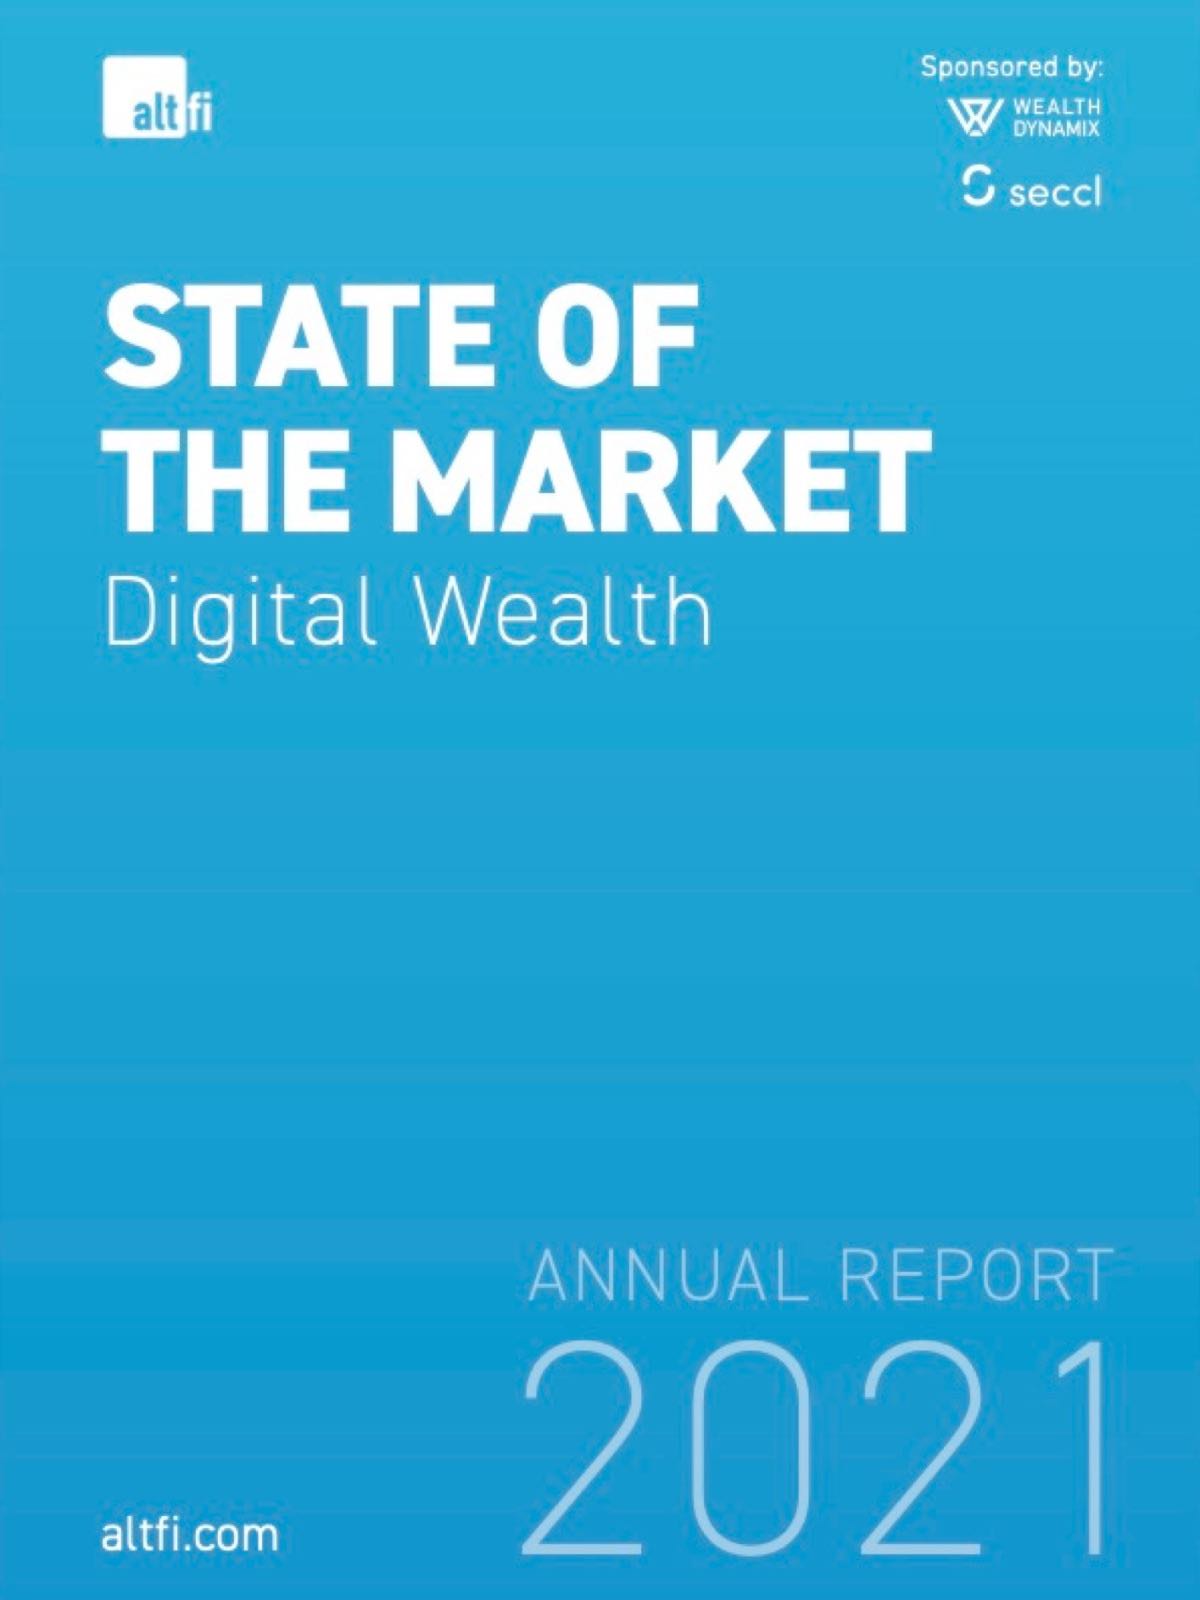 State of the market, Digital Wealth, Annual Report 2021 cover